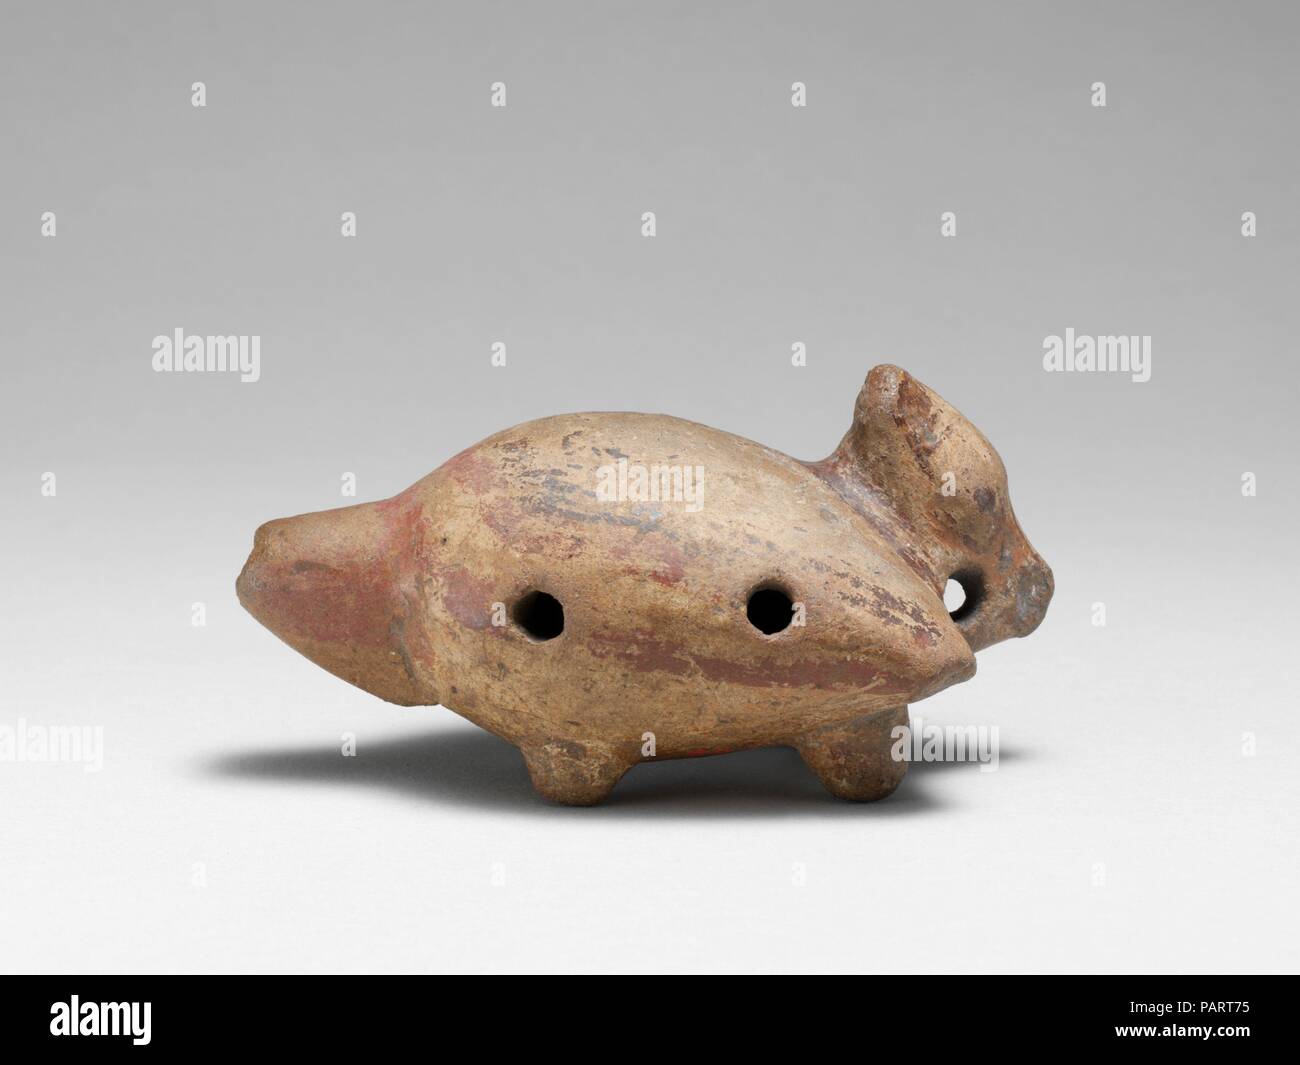 Pottery Whistle. Culture: Costa Rican. Dimensions: L. 10.6 cm (4-3/16 in.); W. 5.6 cm (2-3/16 in.); H. 5.5 cm (2-1/16 in.); Wt. 118 g.. Date: ca. 800-1525. Museum: Metropolitan Museum of Art, New York, USA. Stock Photo